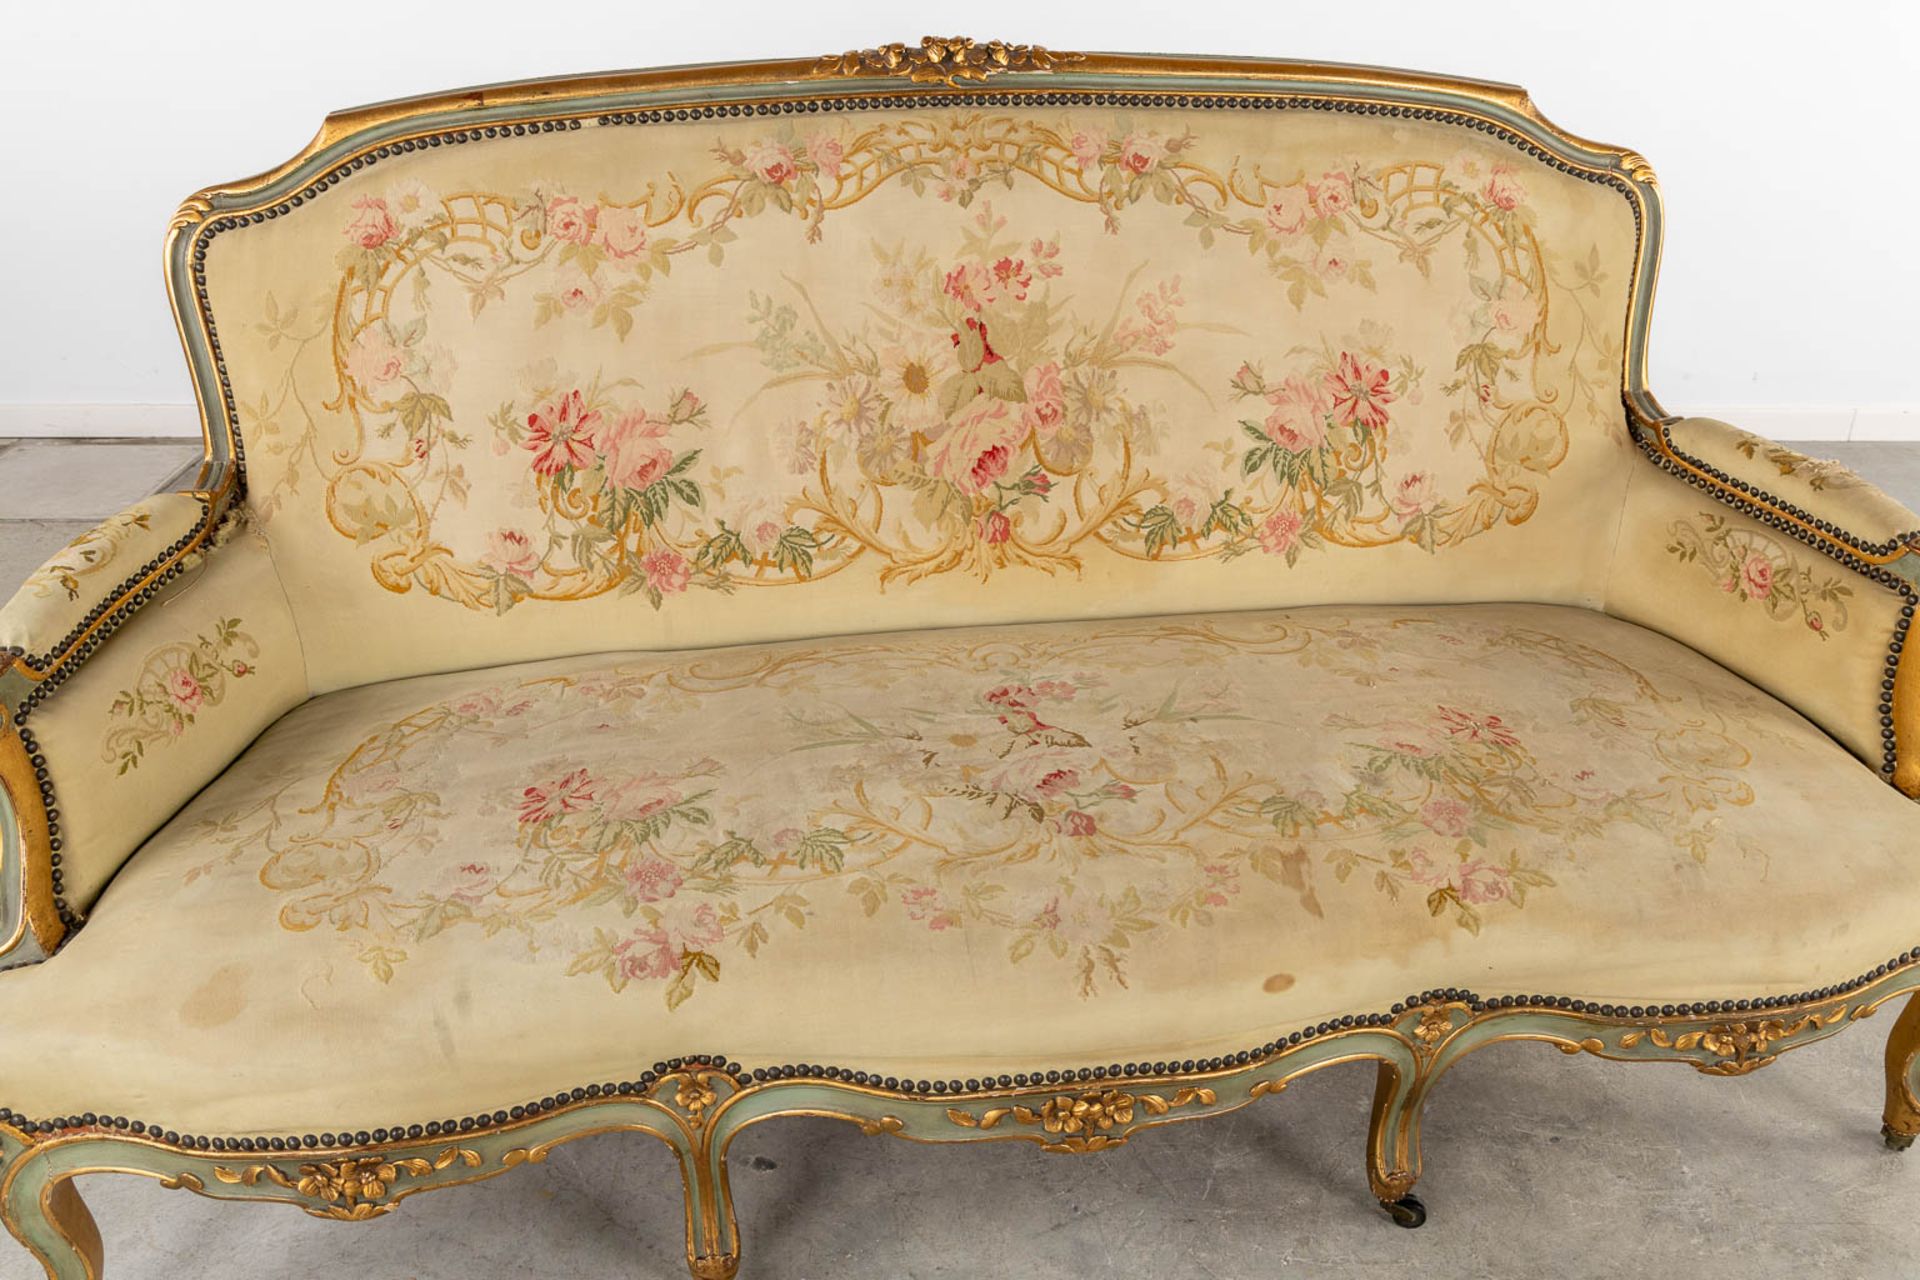 A Louis XV style sofa, upholstered with flower embroideries. (L:80 x W:175 x H:96 cm) - Image 8 of 11